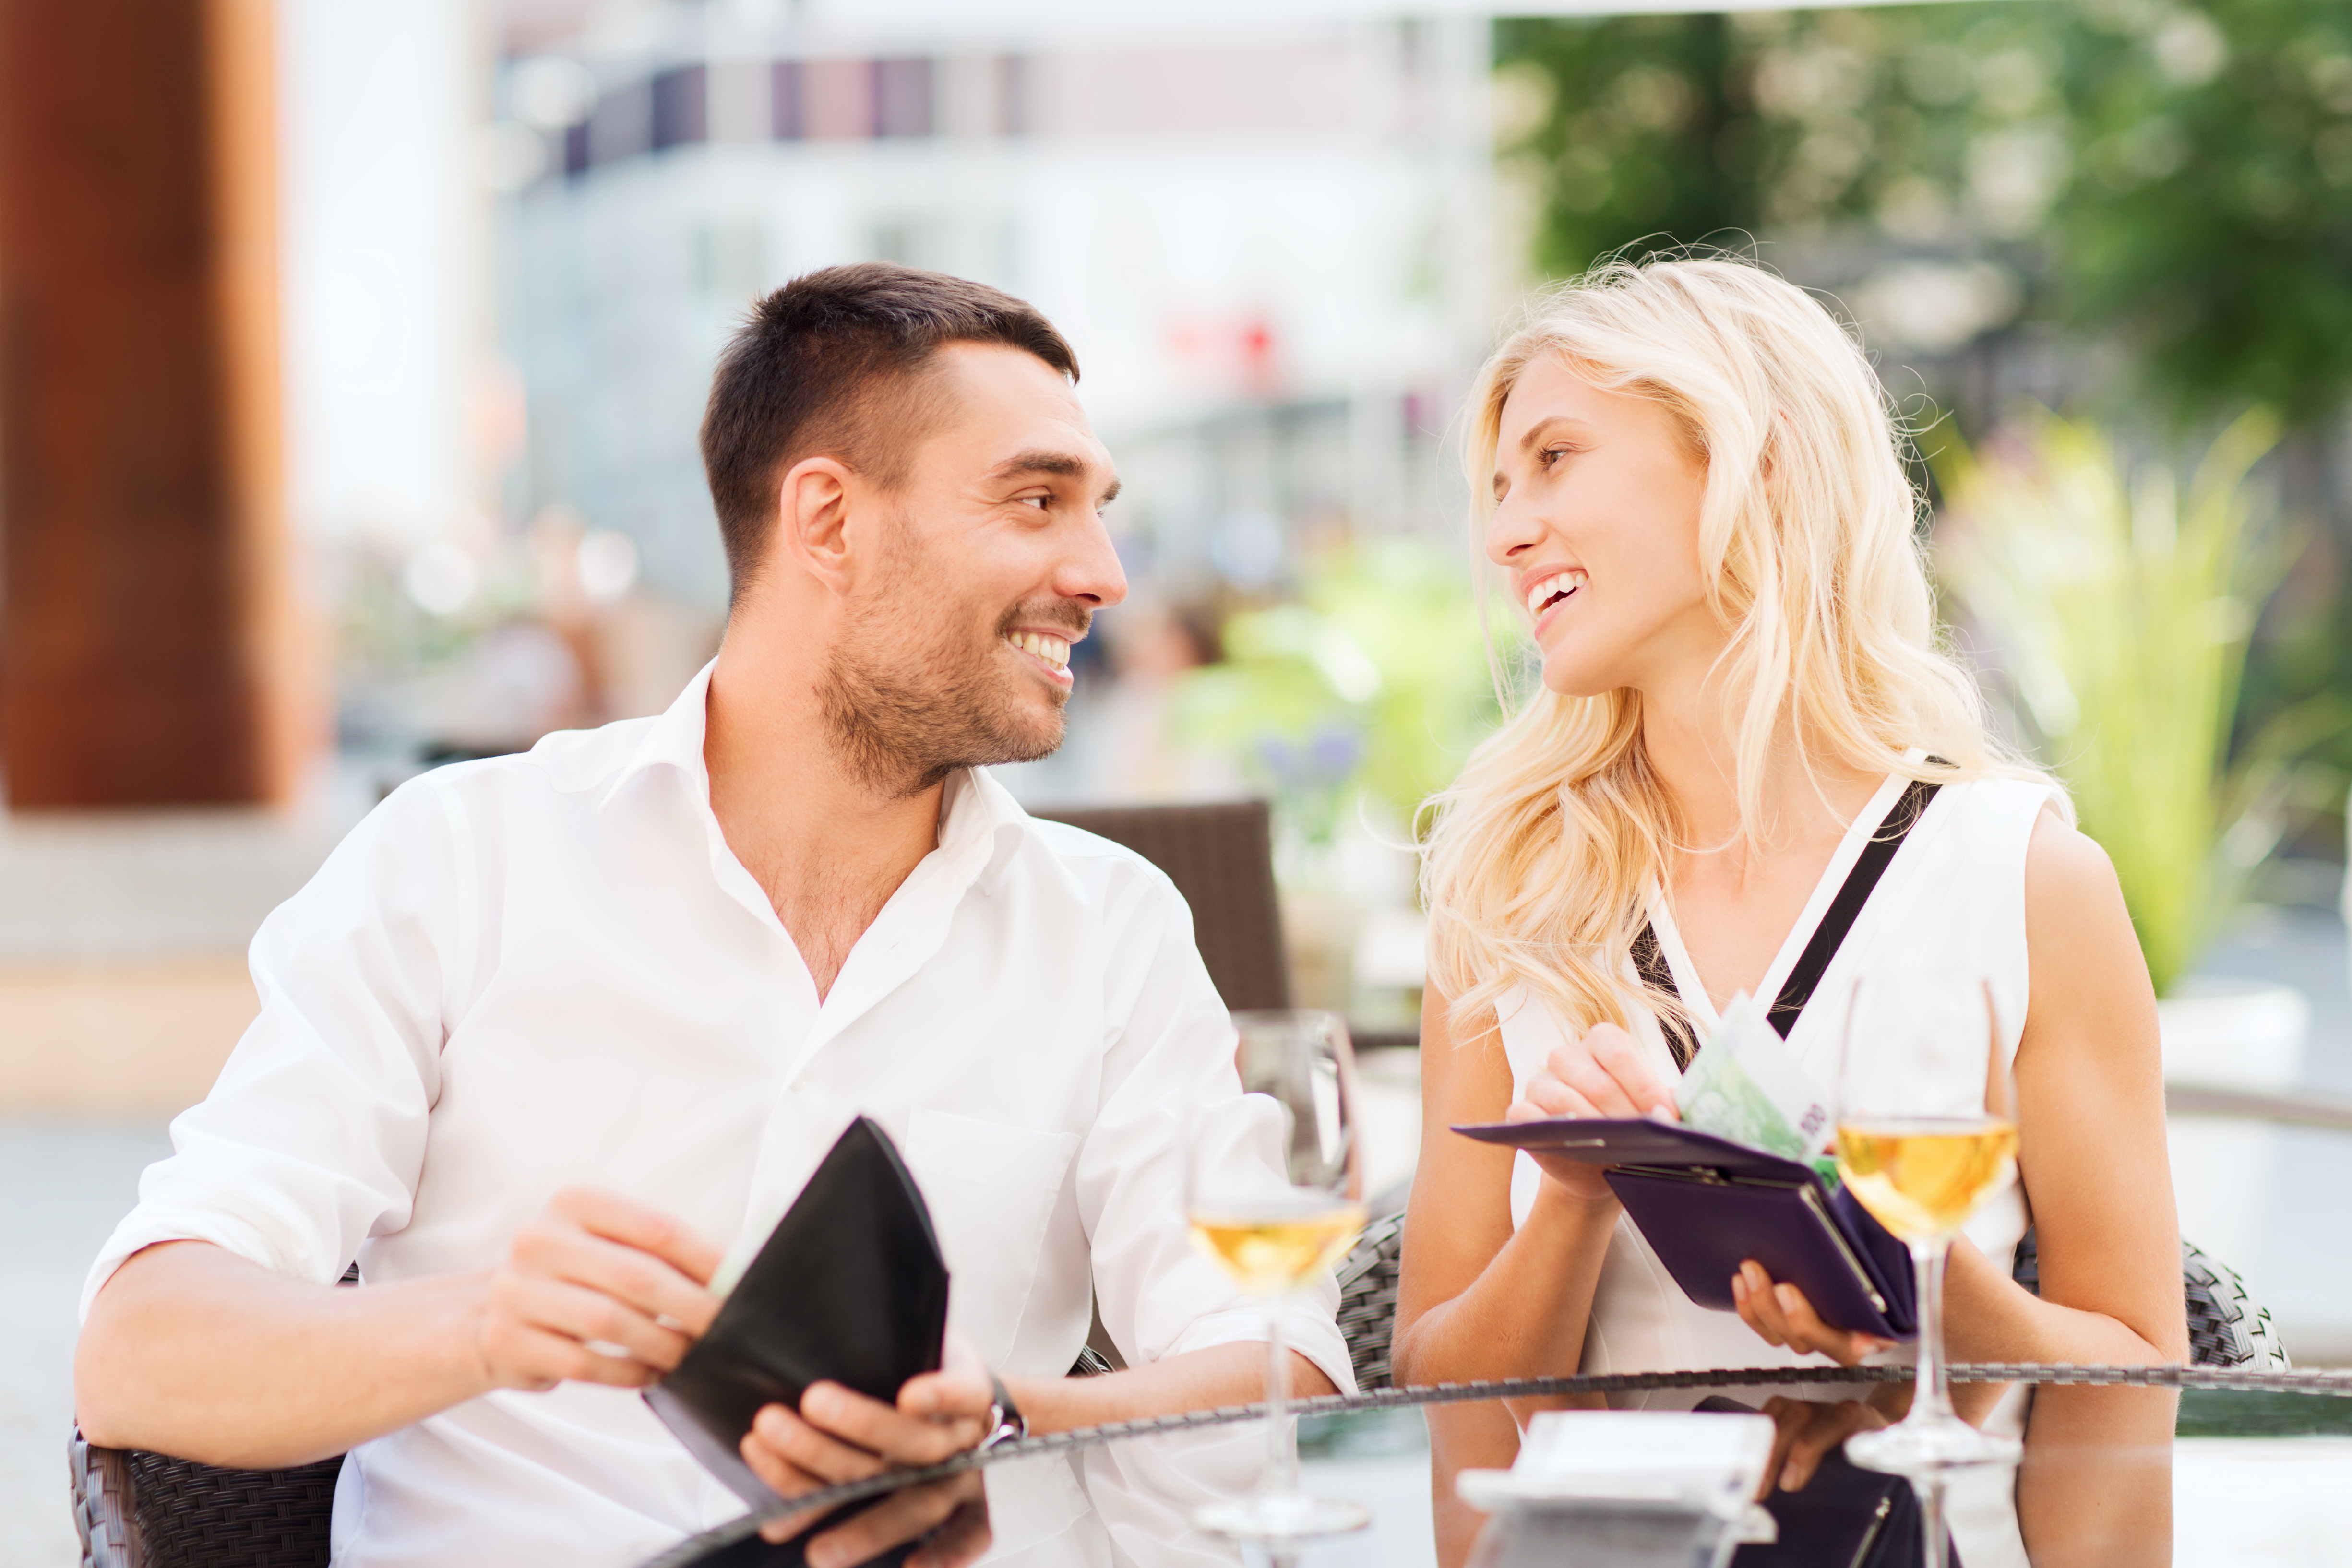 When You're On A Blind Date, Do You Split The Tab With Your Date?